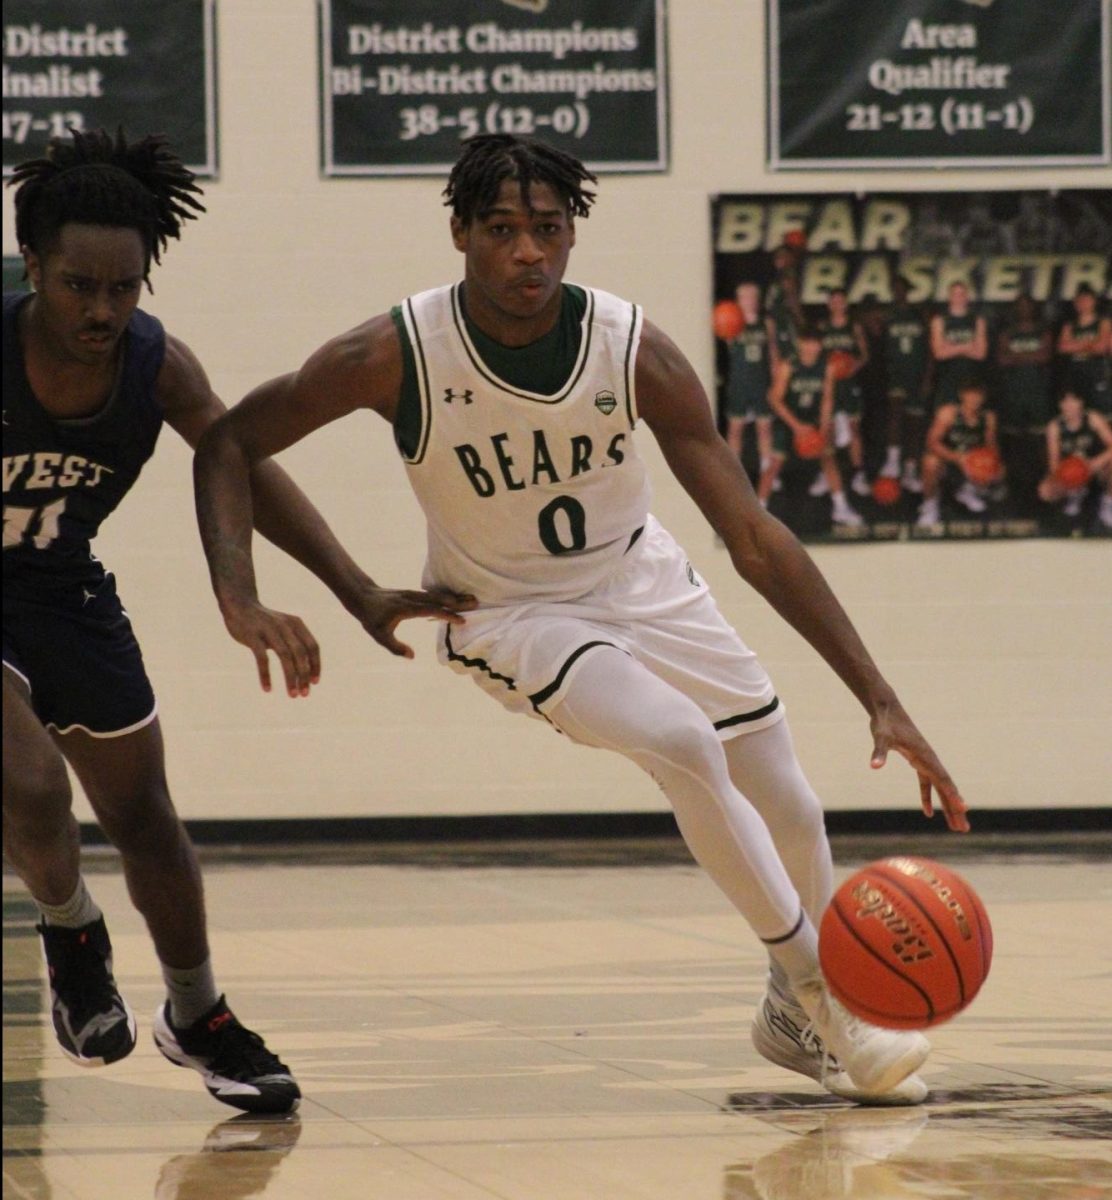 Senior+Alantheon+Winn+has+played+on+the+varsity+basketball+team+since+his+freshman+year+and+will+soon+play+for+Lee+College+in+Baytown.+